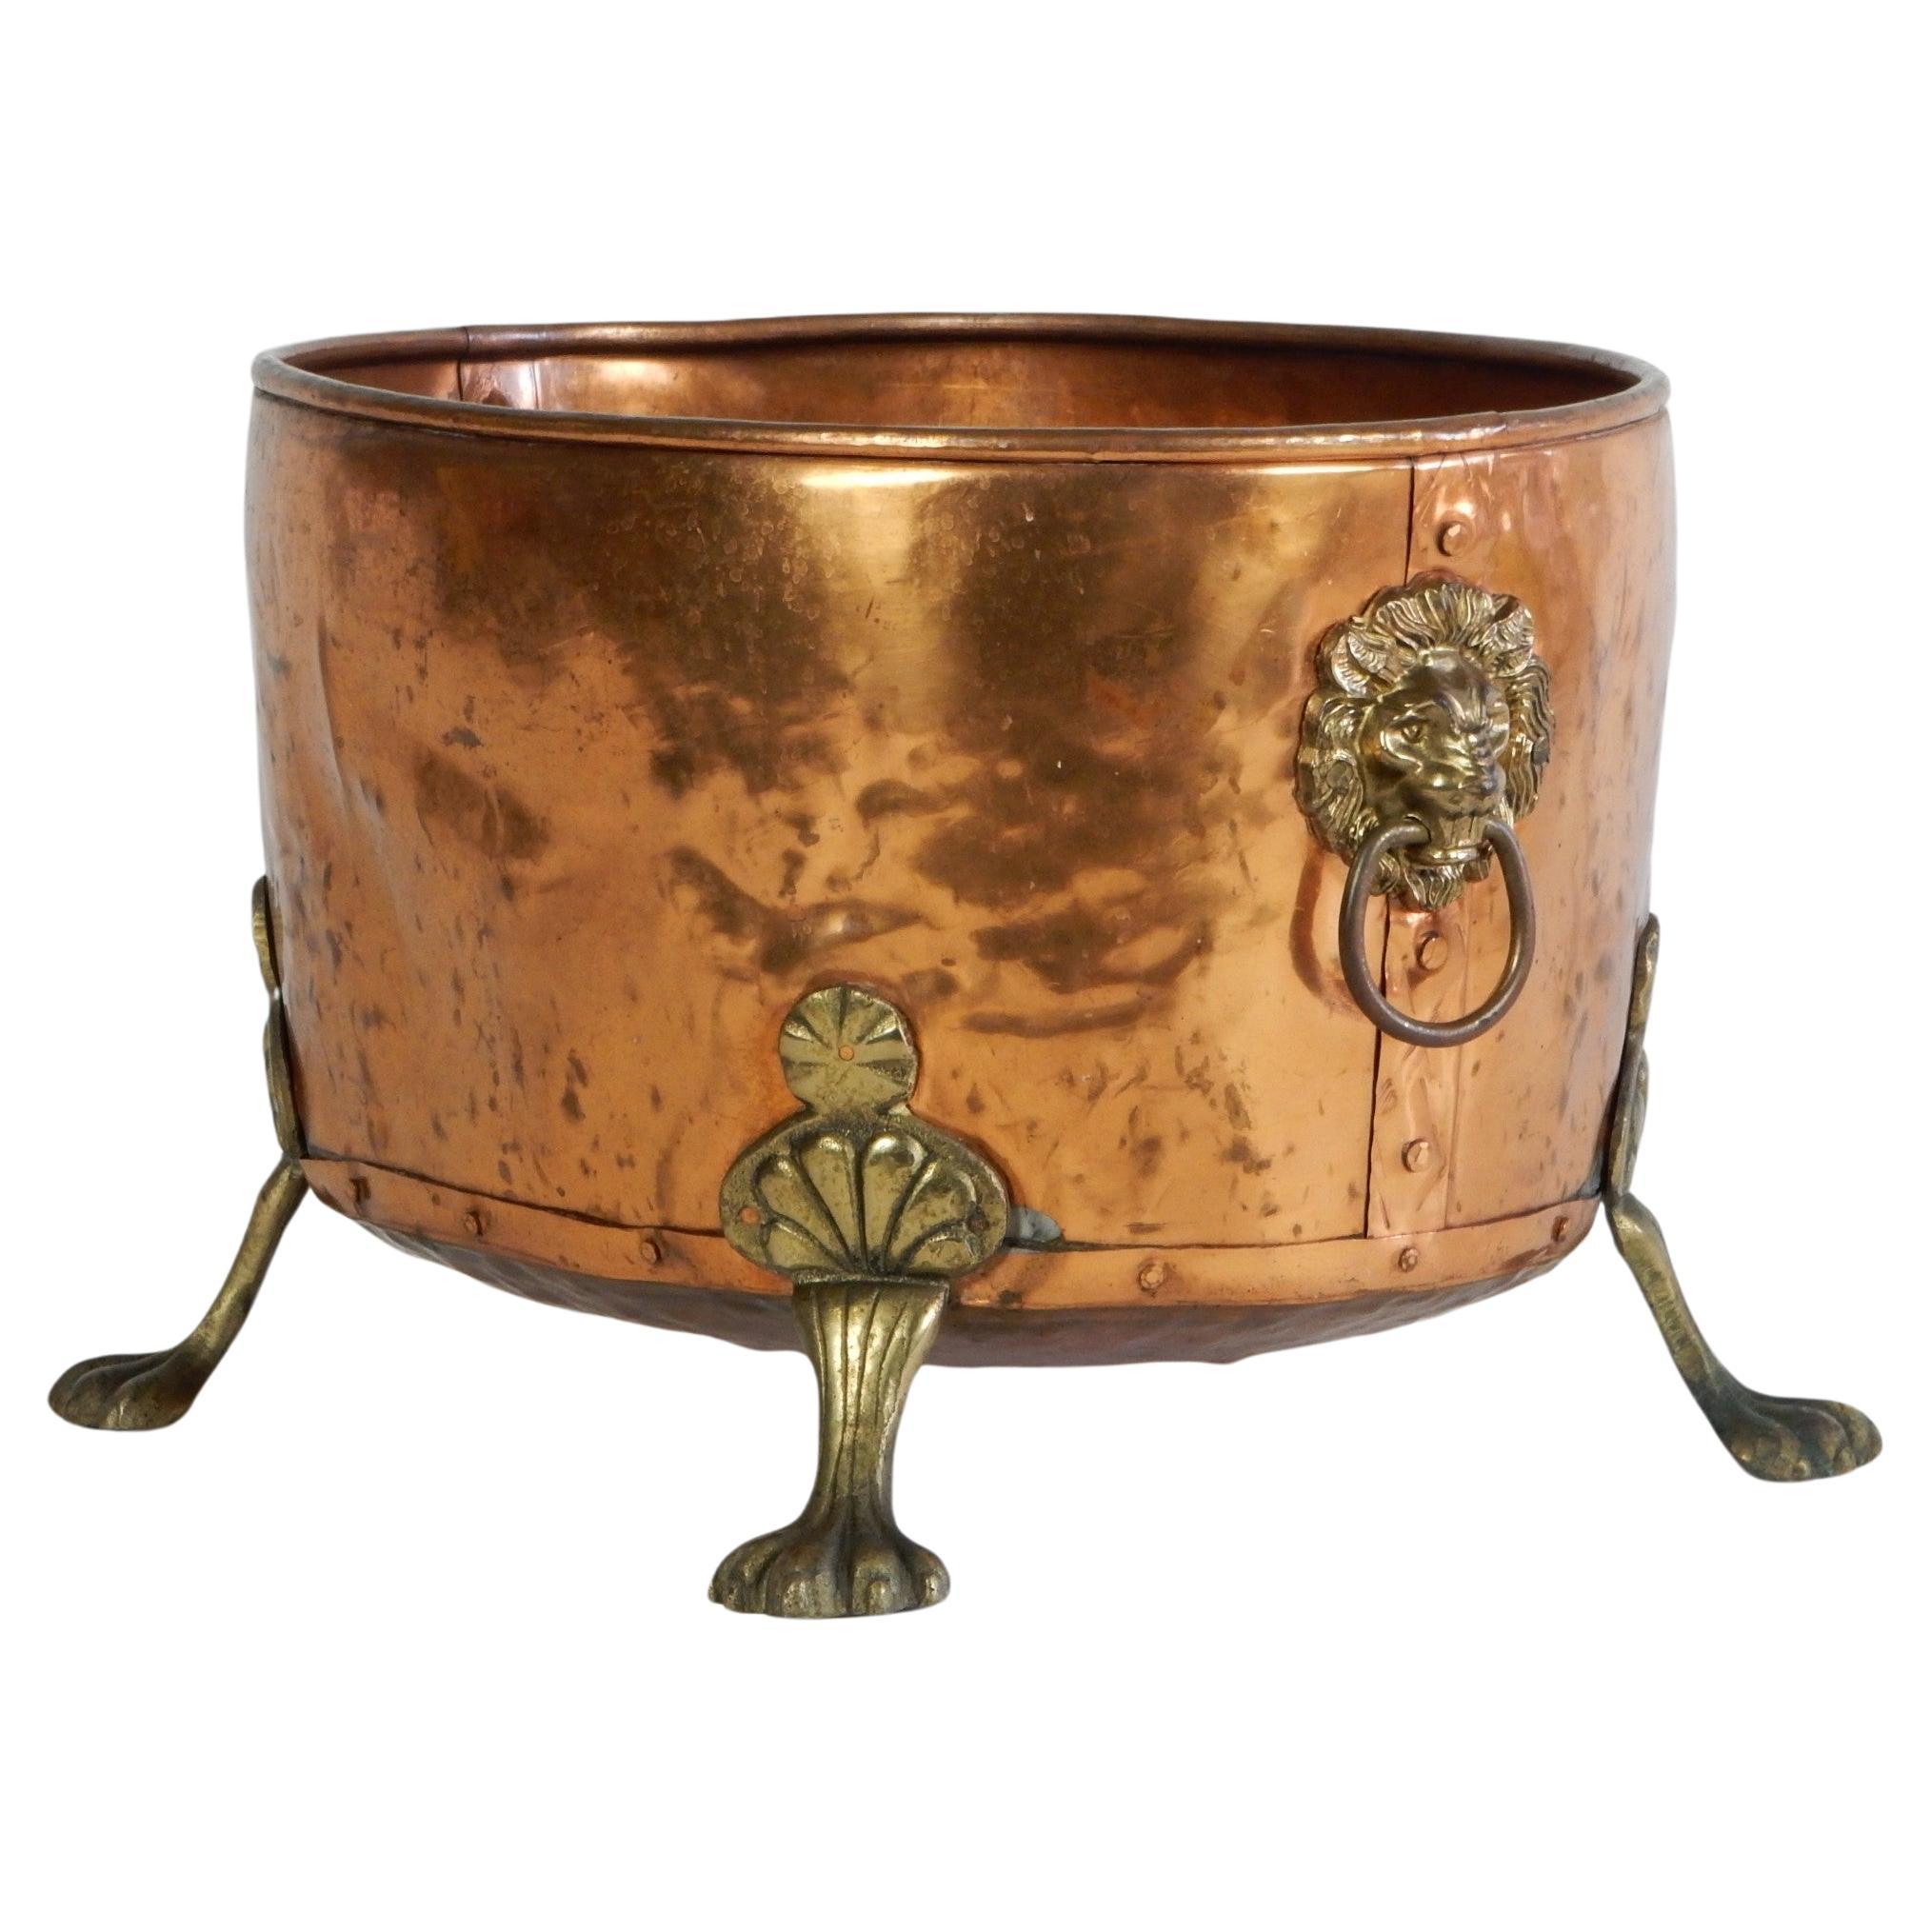 19th Century English Hammered Copper & Brass Claw Footed Lion Log Bin Planter For Sale